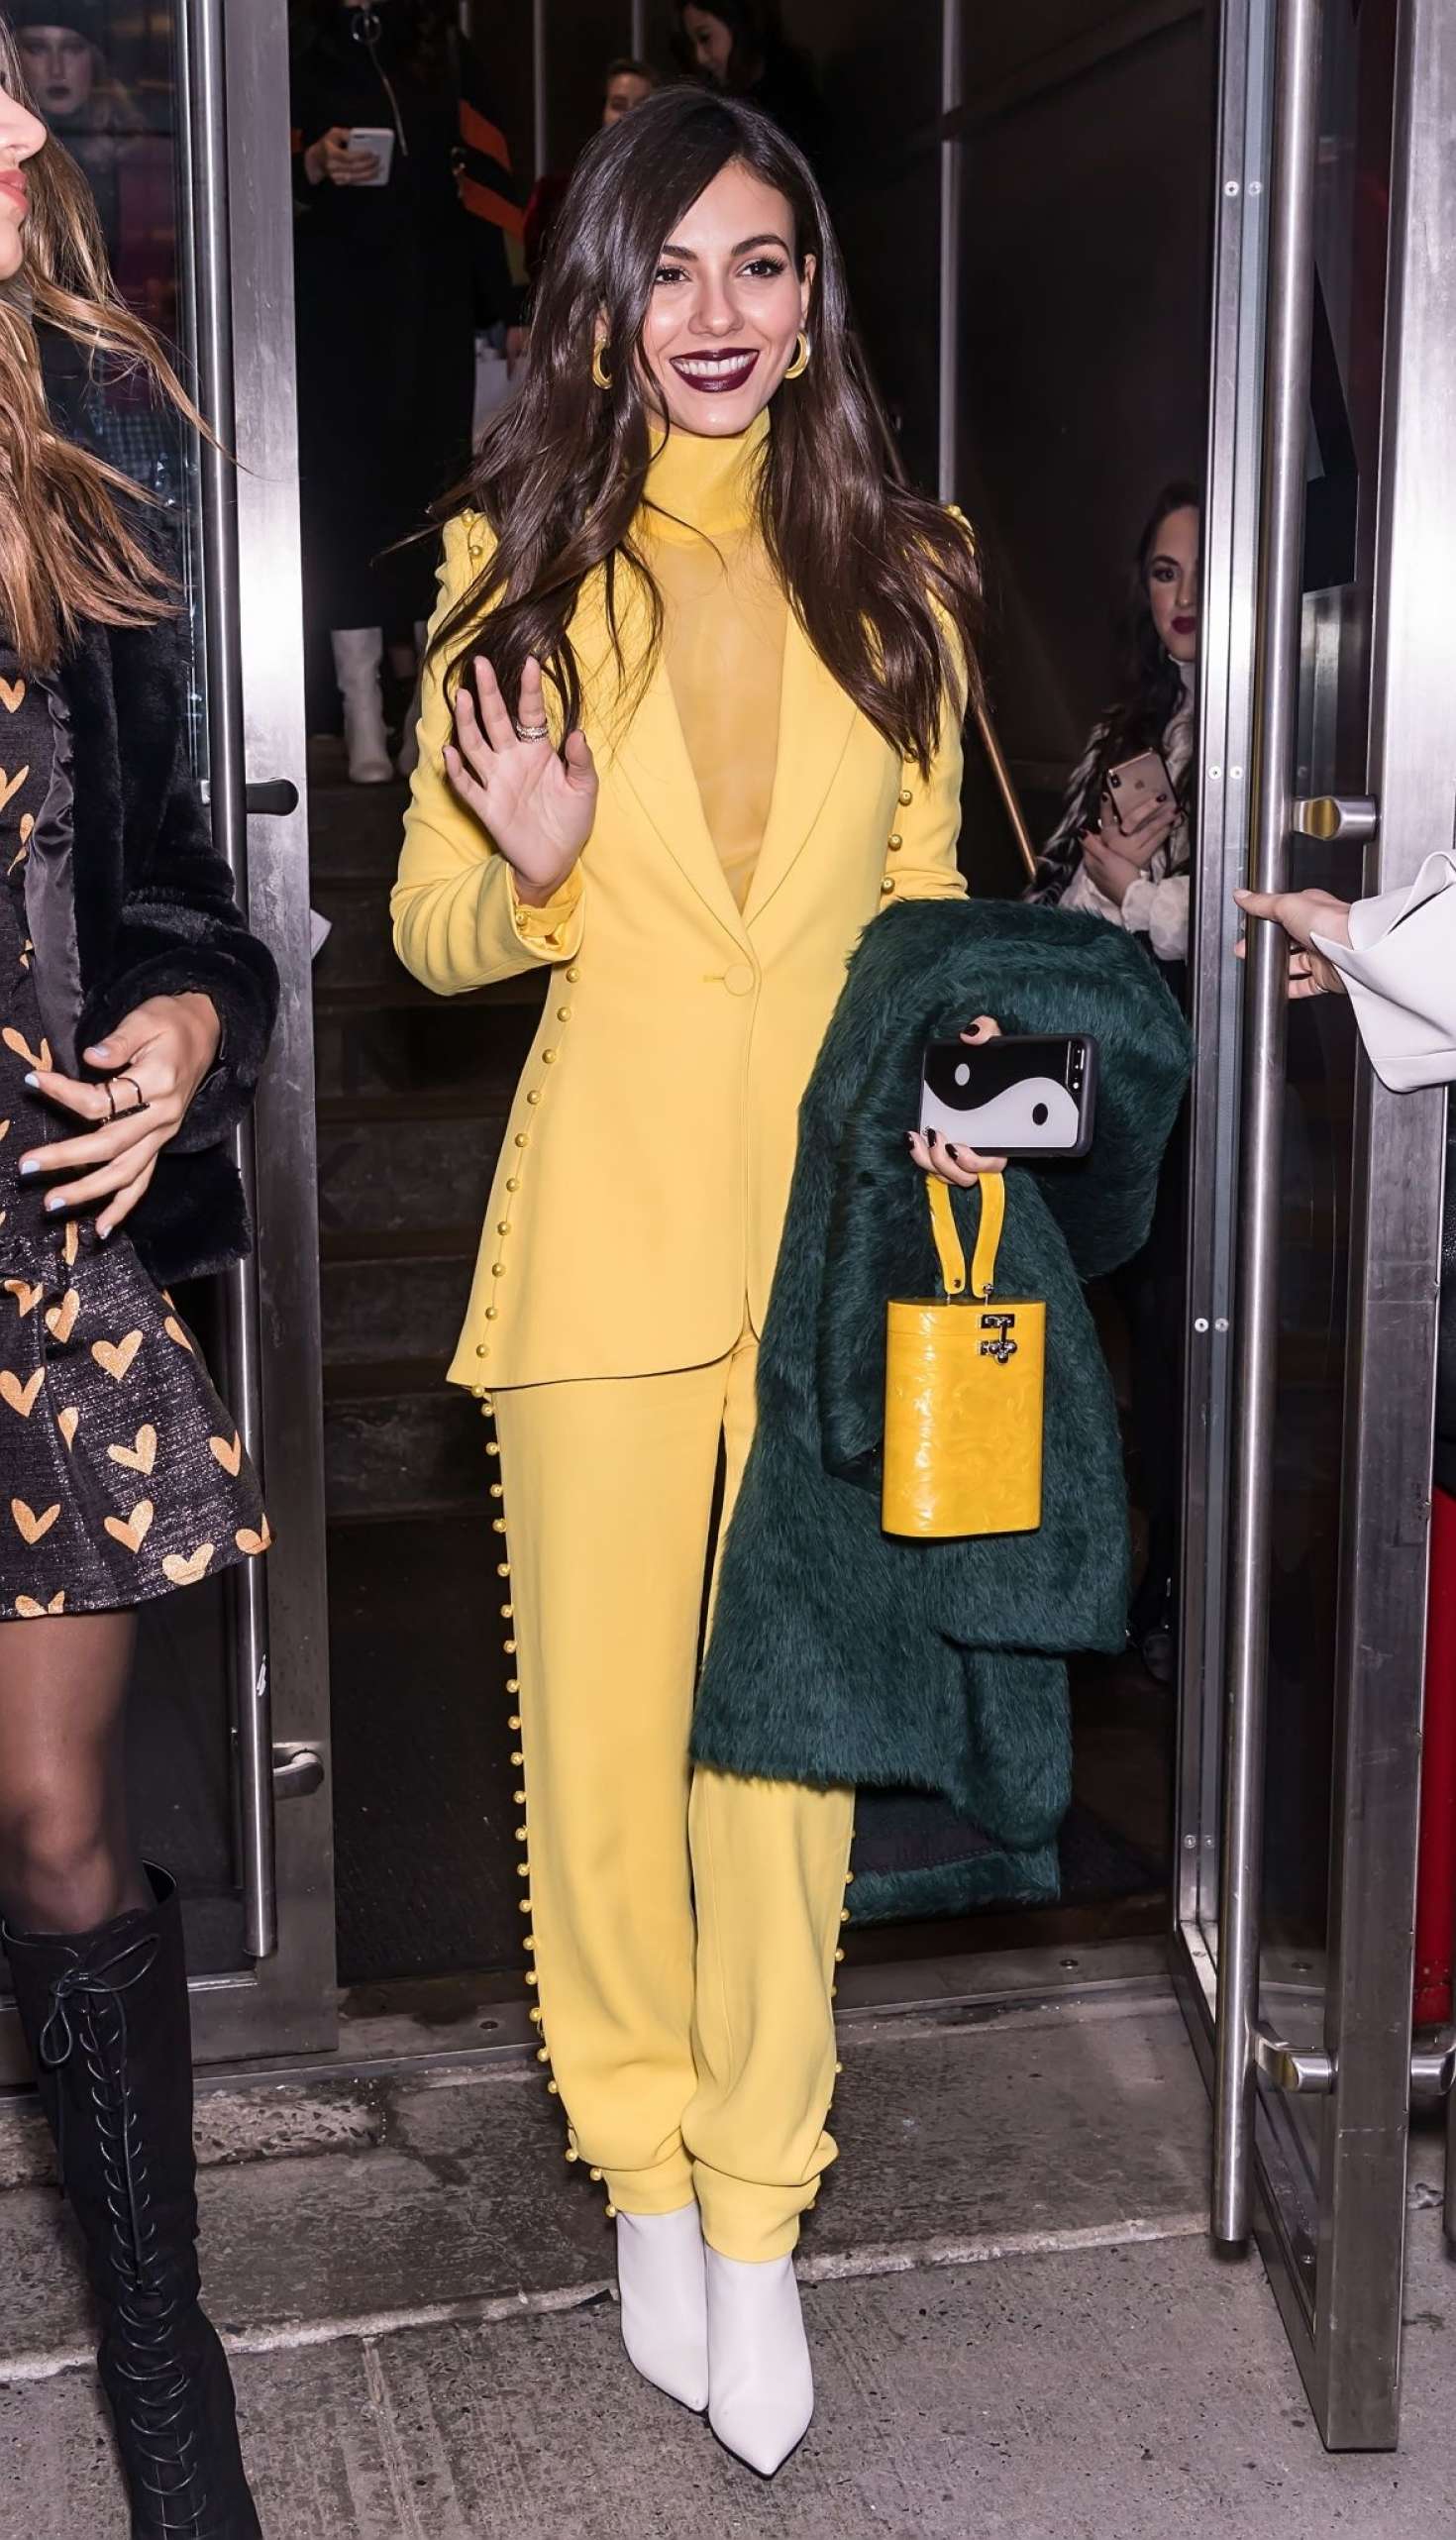 Victoria Justice â€“ Leaving the Pamella Roland Fashion Show in NYC